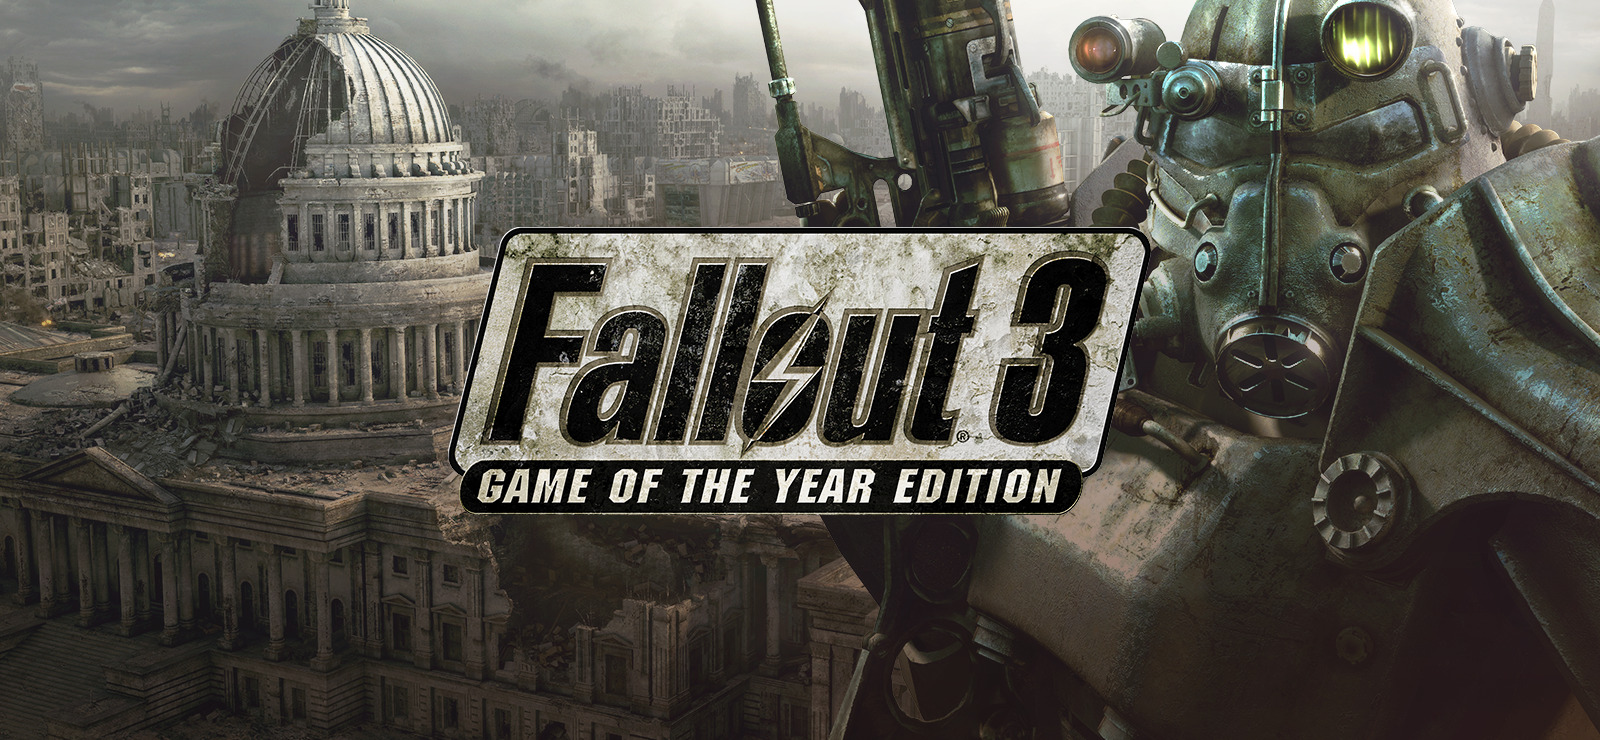 Fallout 3: Game of the Year Edition for ios download free